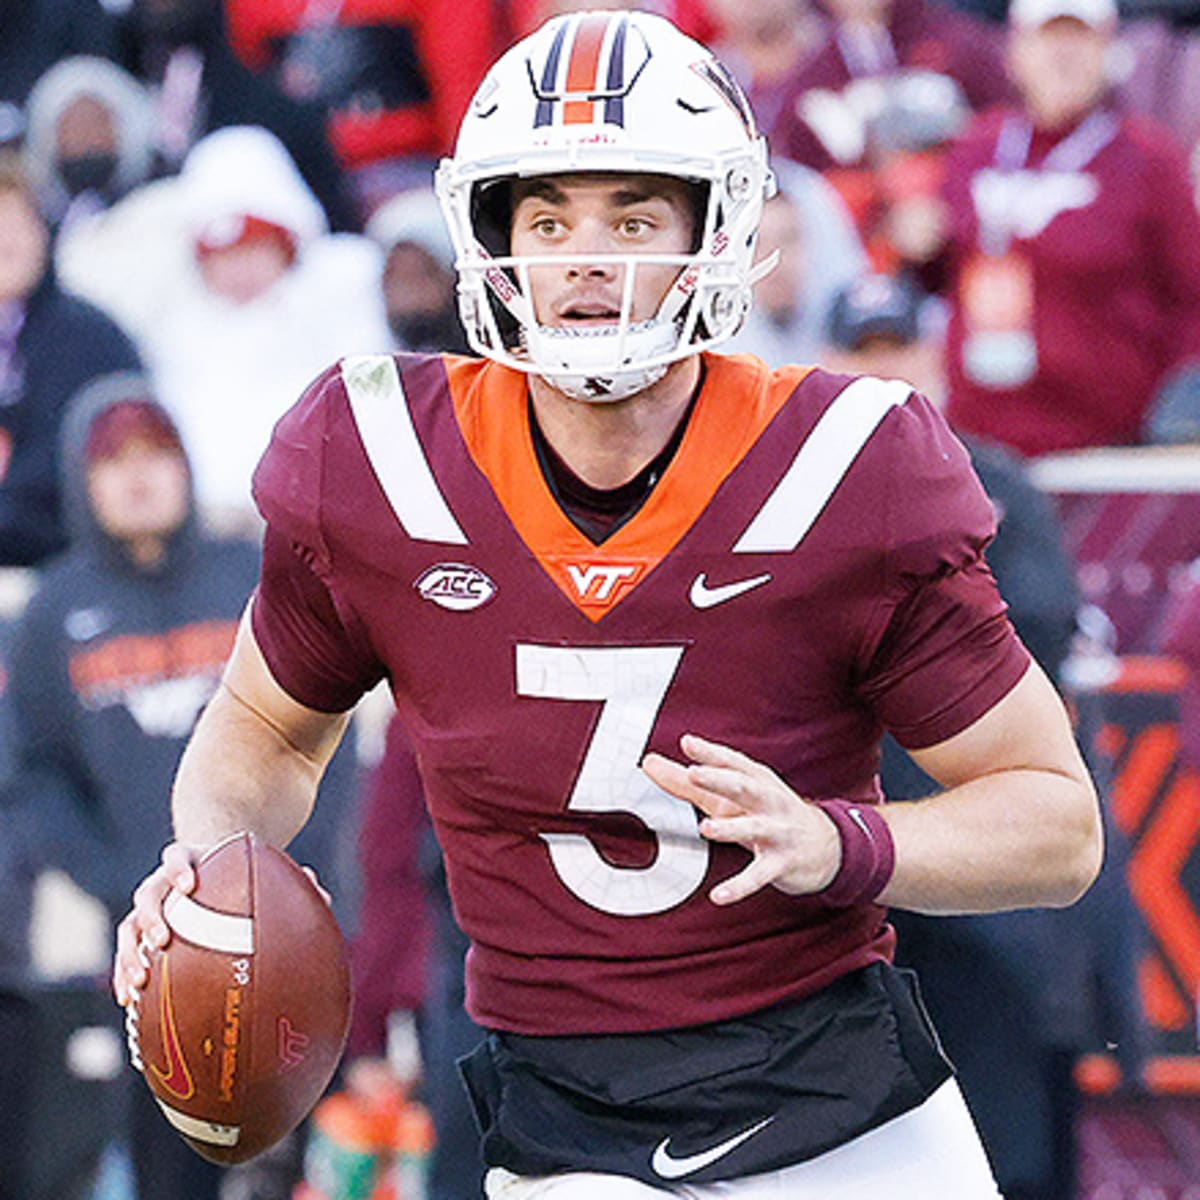 Virginia Tech Vs Boston College Football Prediction And Preview - Athlonsportscom Expert Predictions Picks And Previews